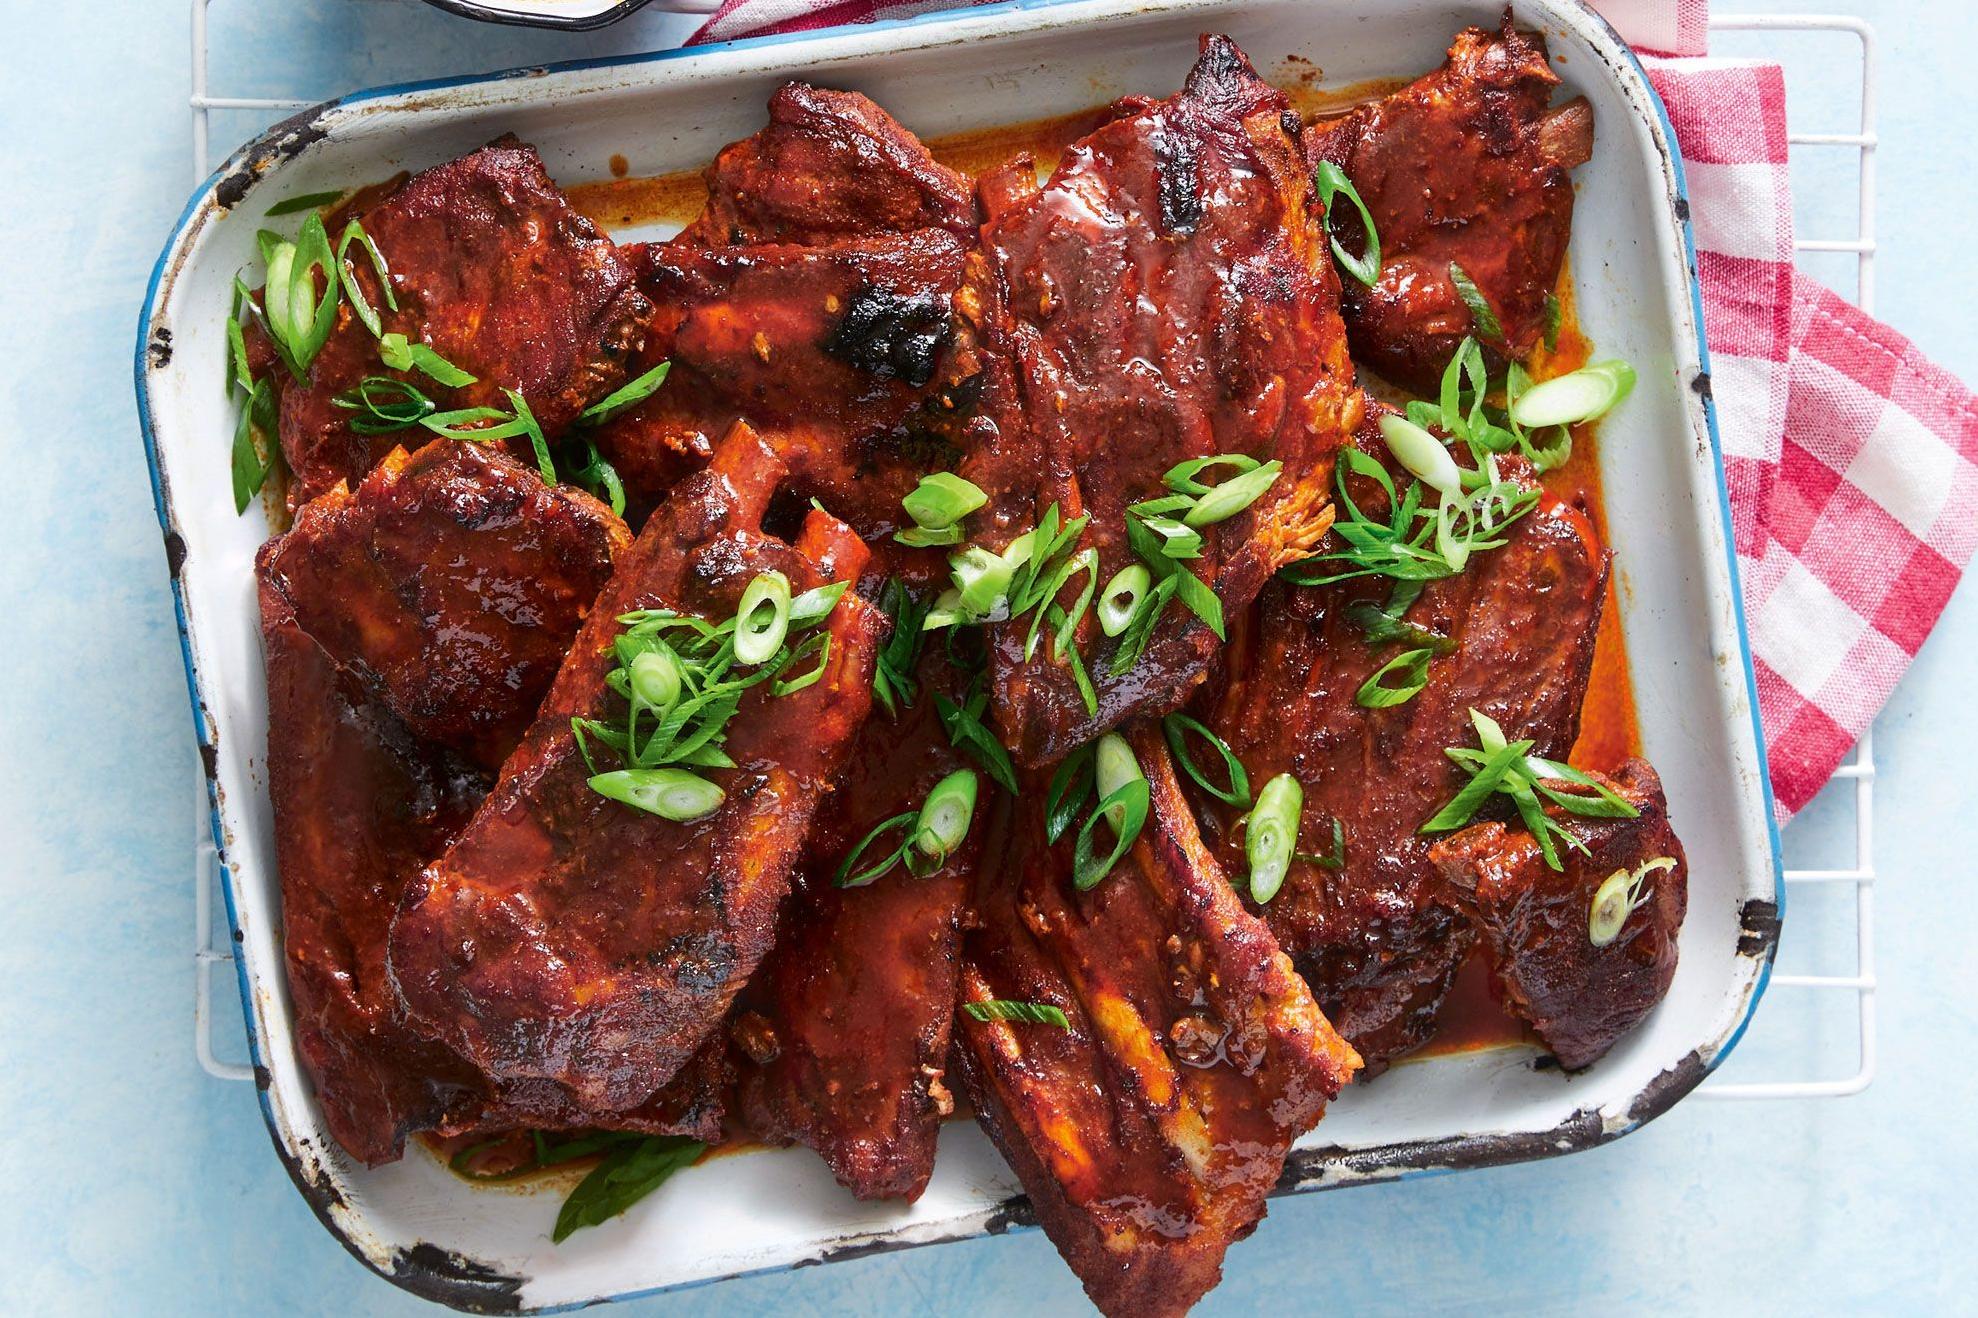  Trust us, you'll want to slap your mama after trying these finger-licking ribs.